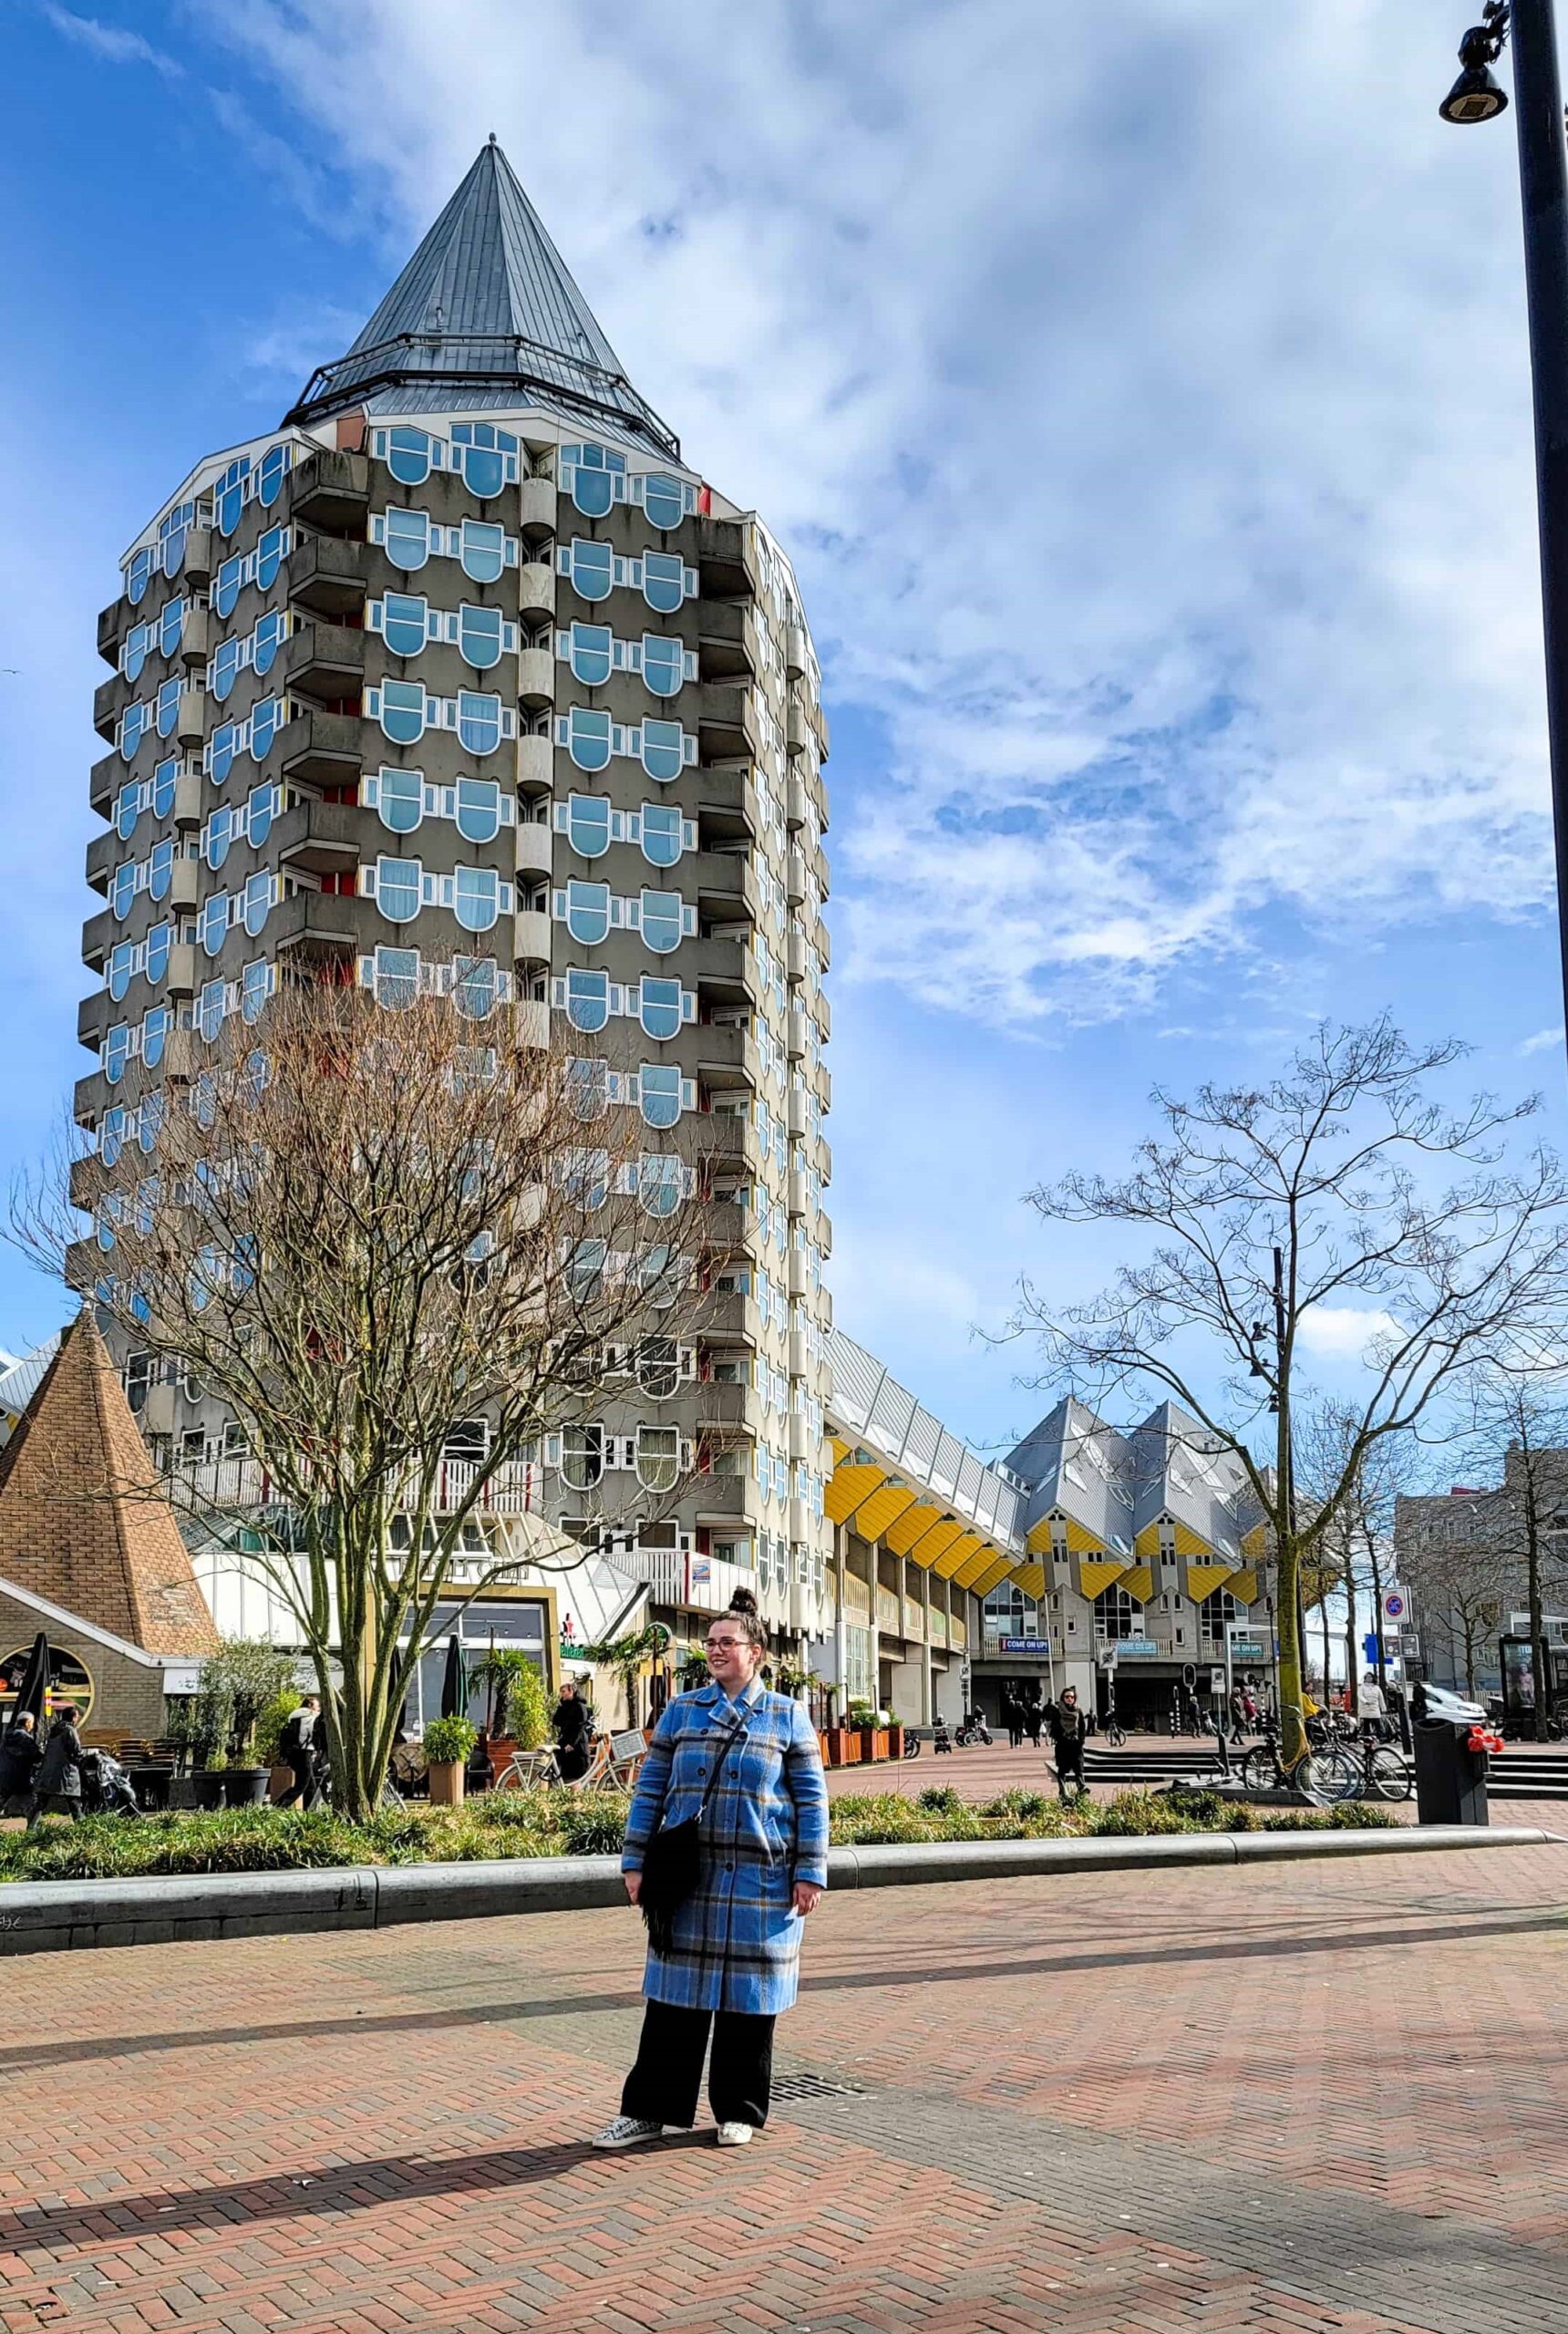 me in front of the yellow cube houses in rotterdam